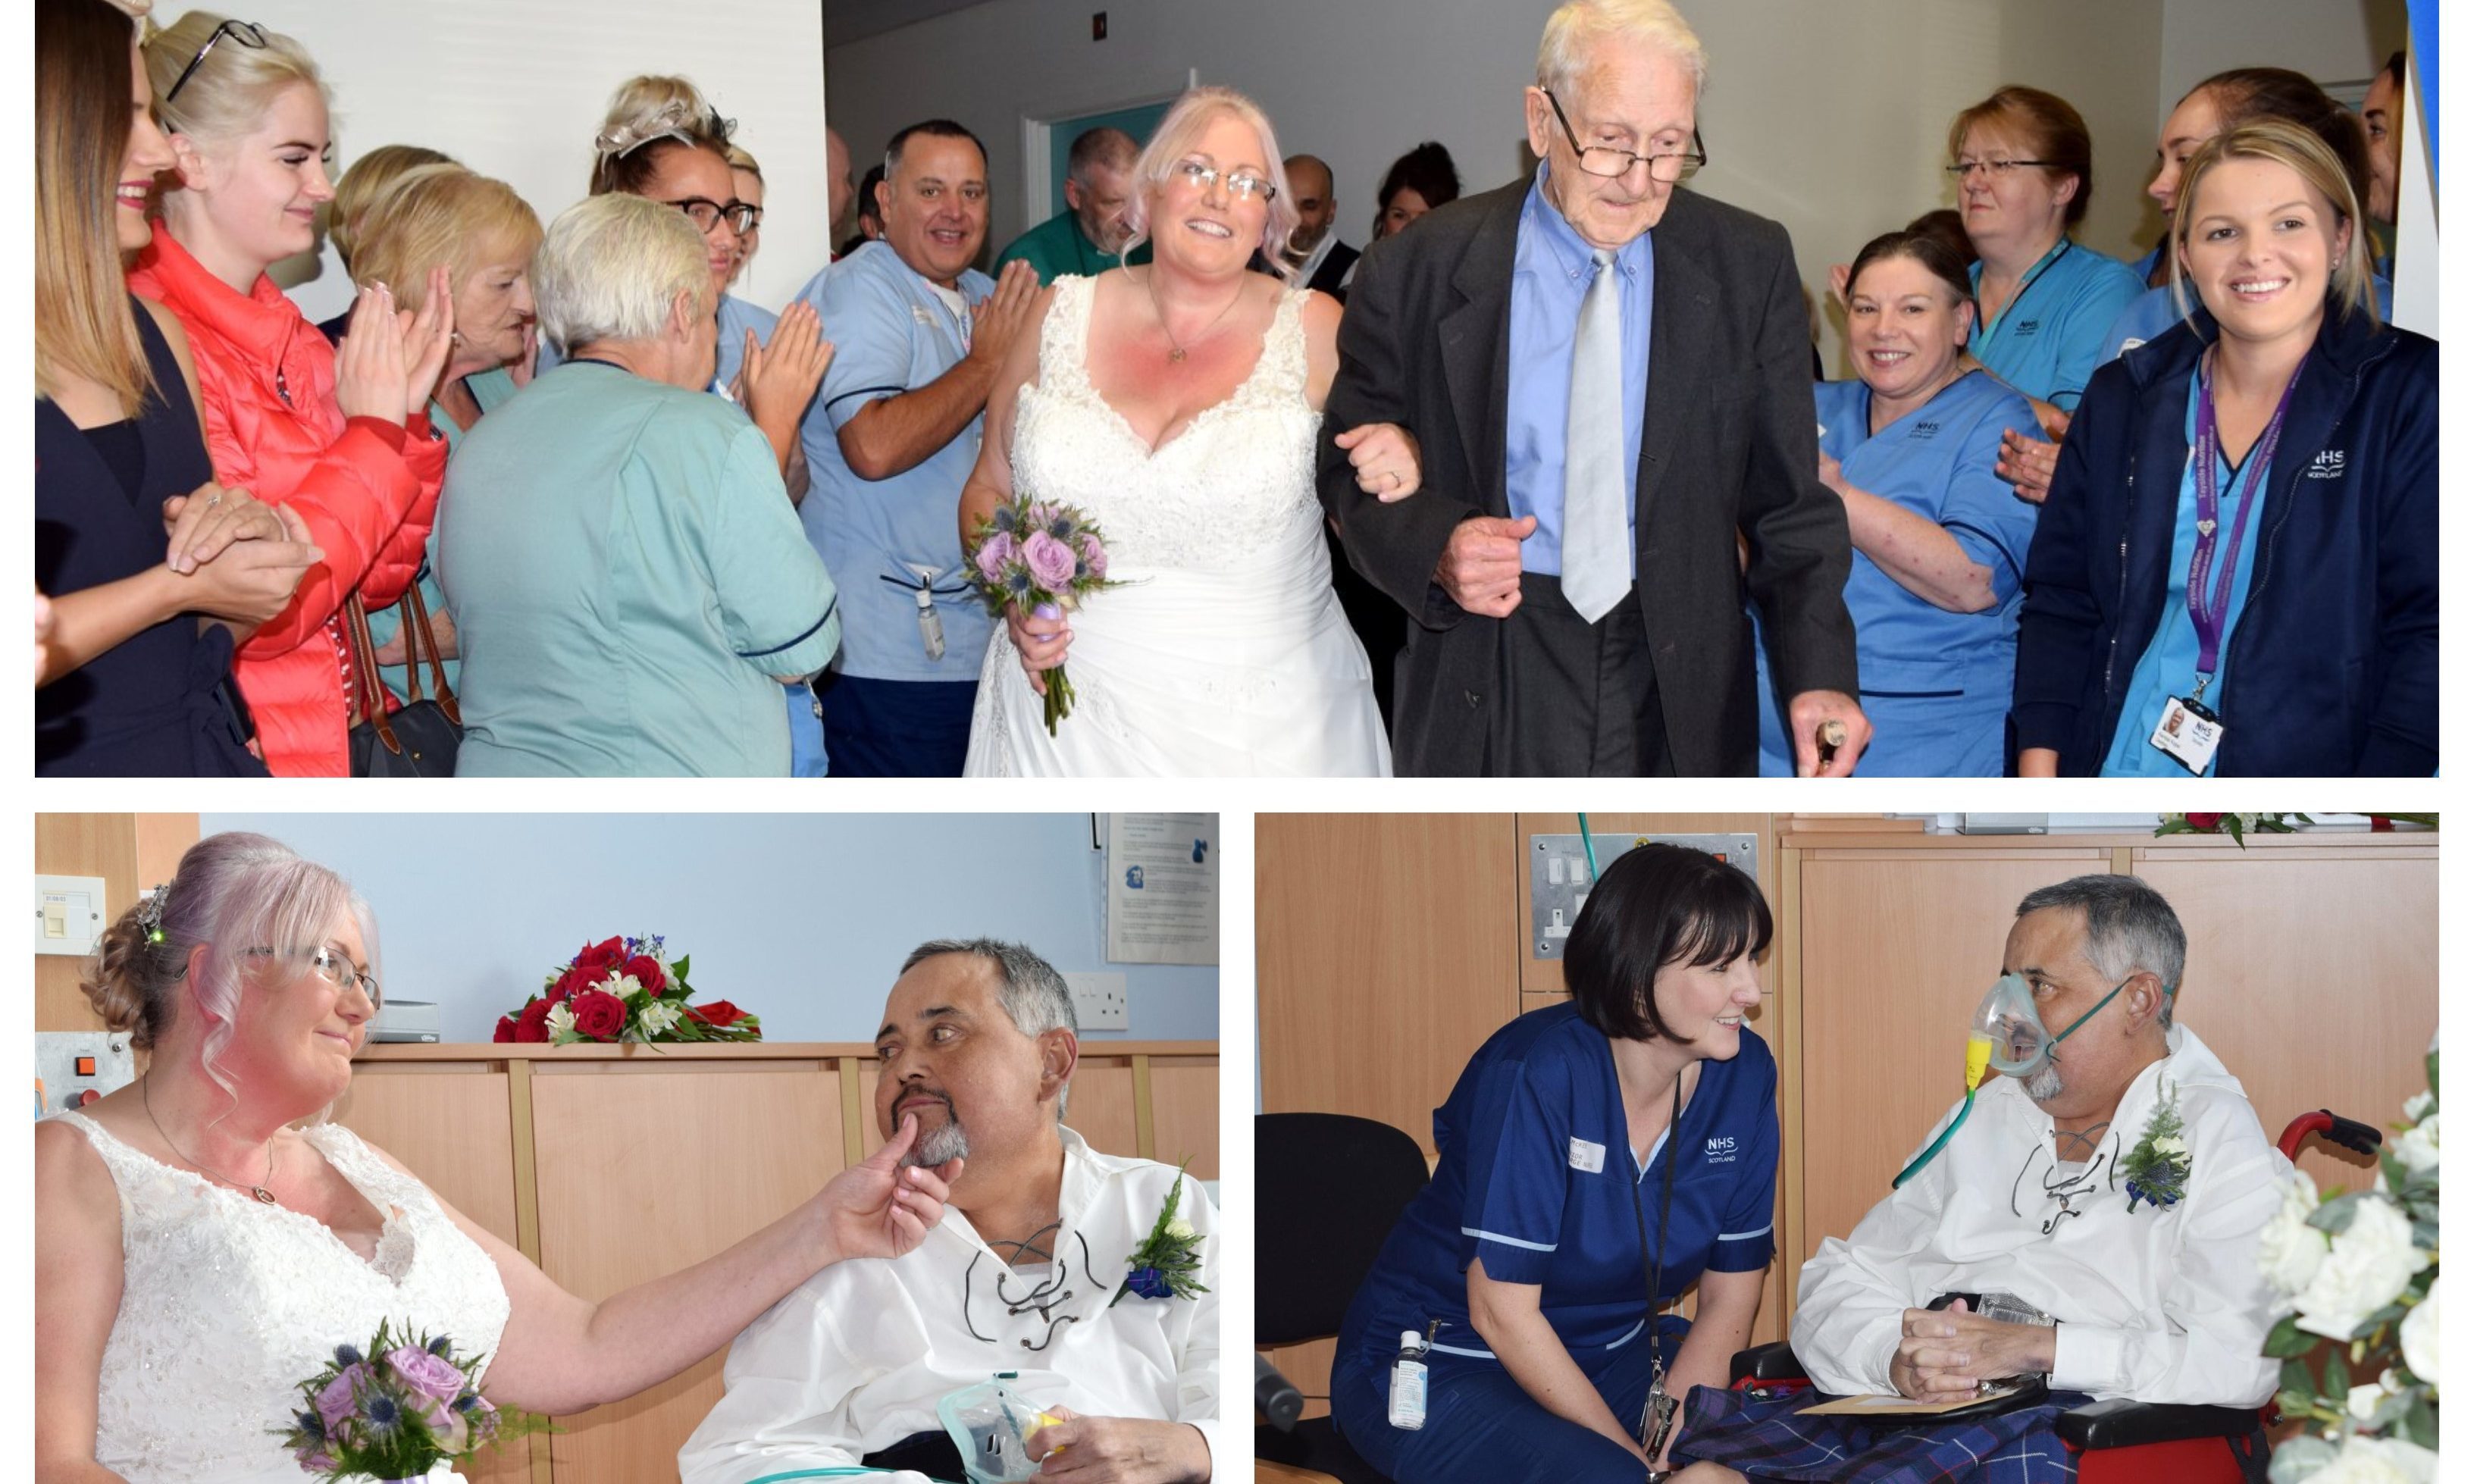 Robert and Debbie tying the knot at Ninewells Hospital.